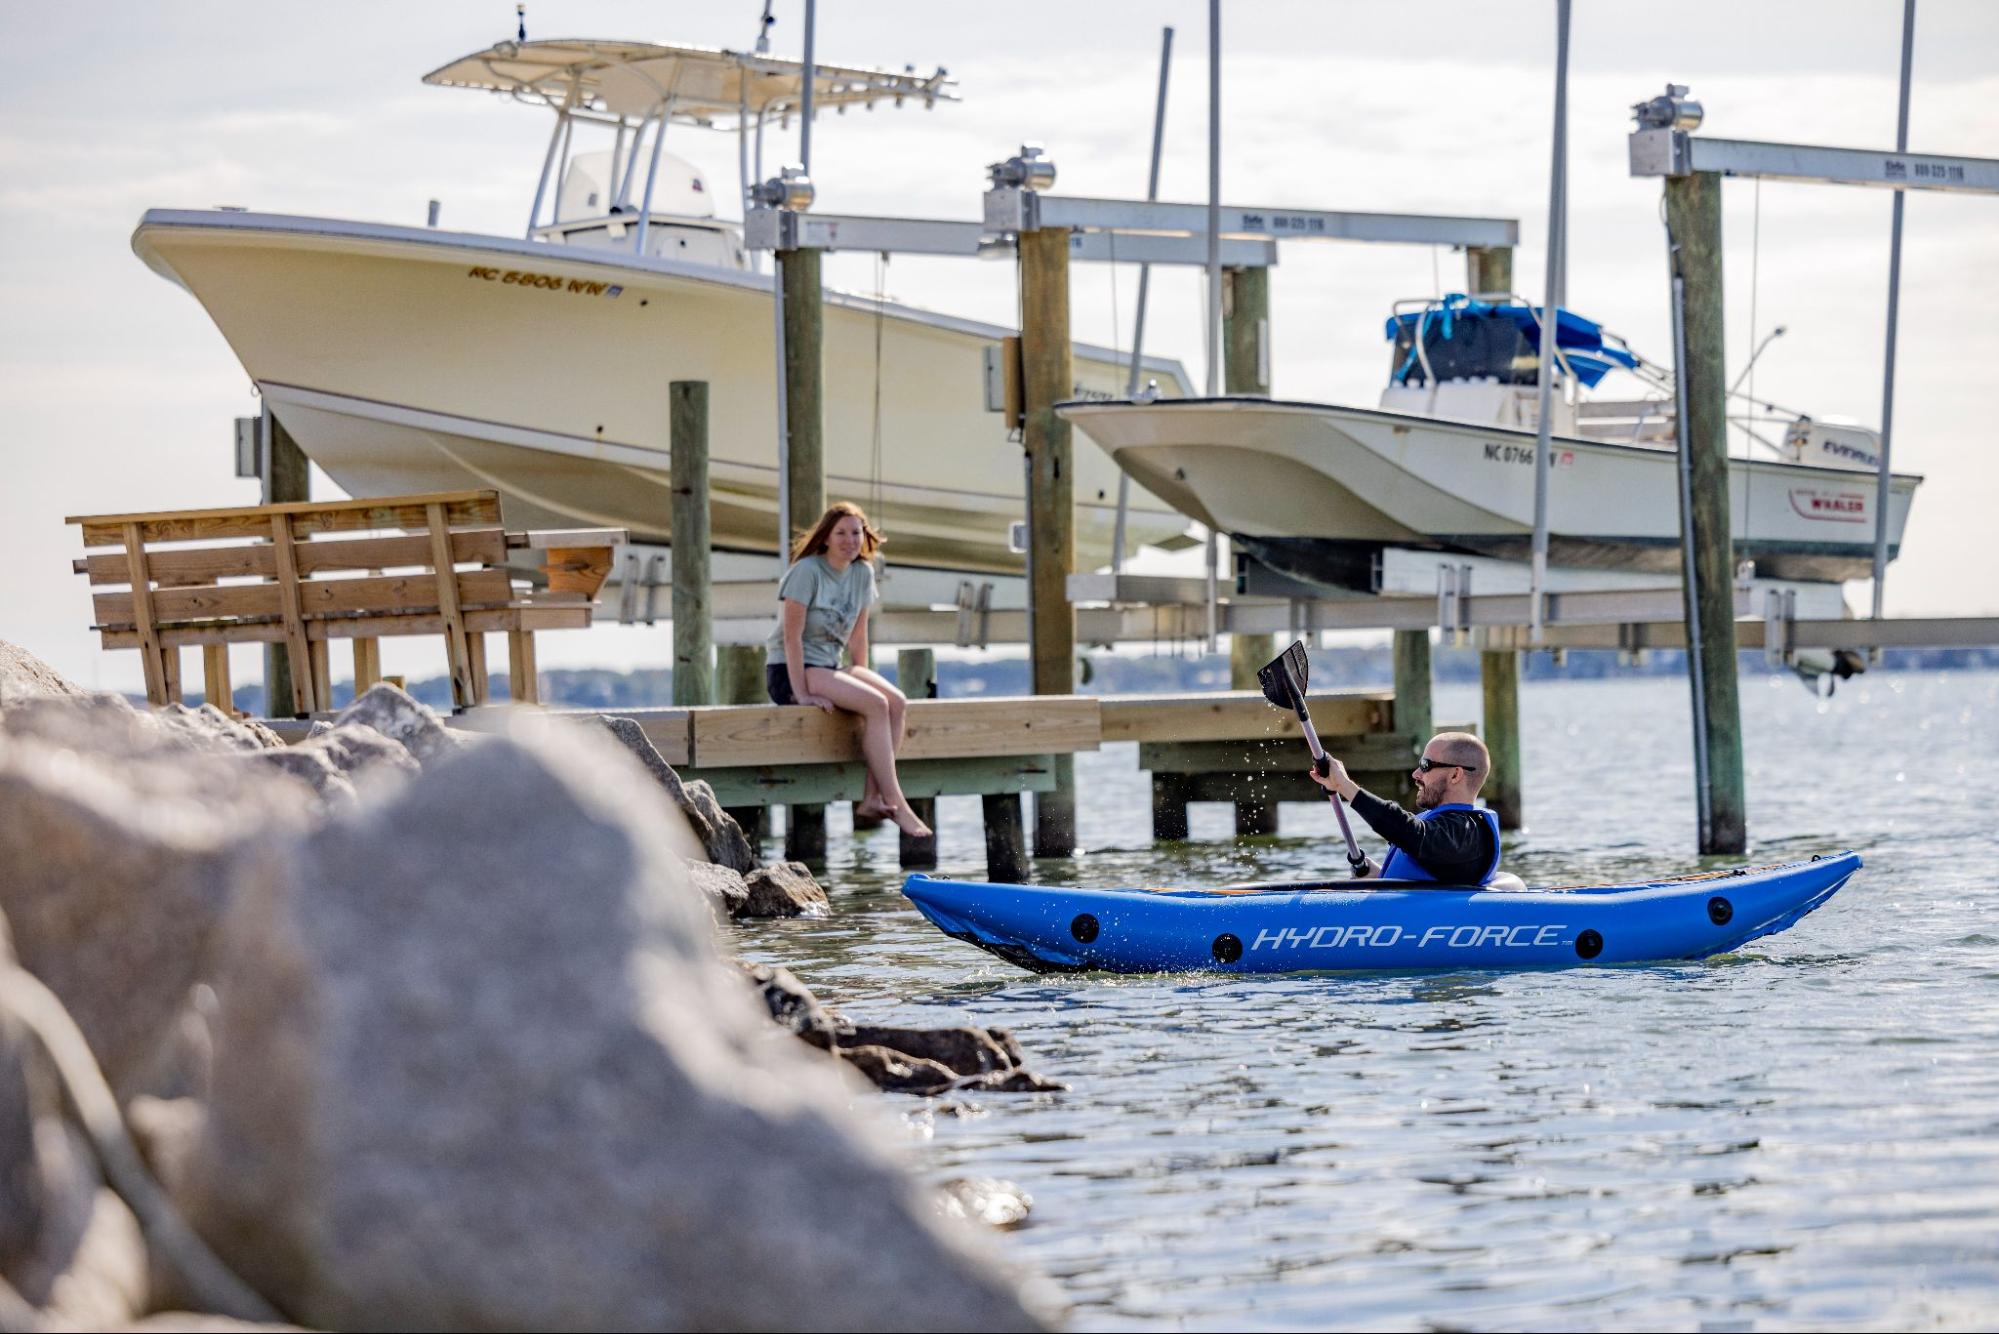 A person in a blue kayak approaches a dock, where there is another person sitting on the edge of the dock. There are two boats in the background suspended in boat lifts.